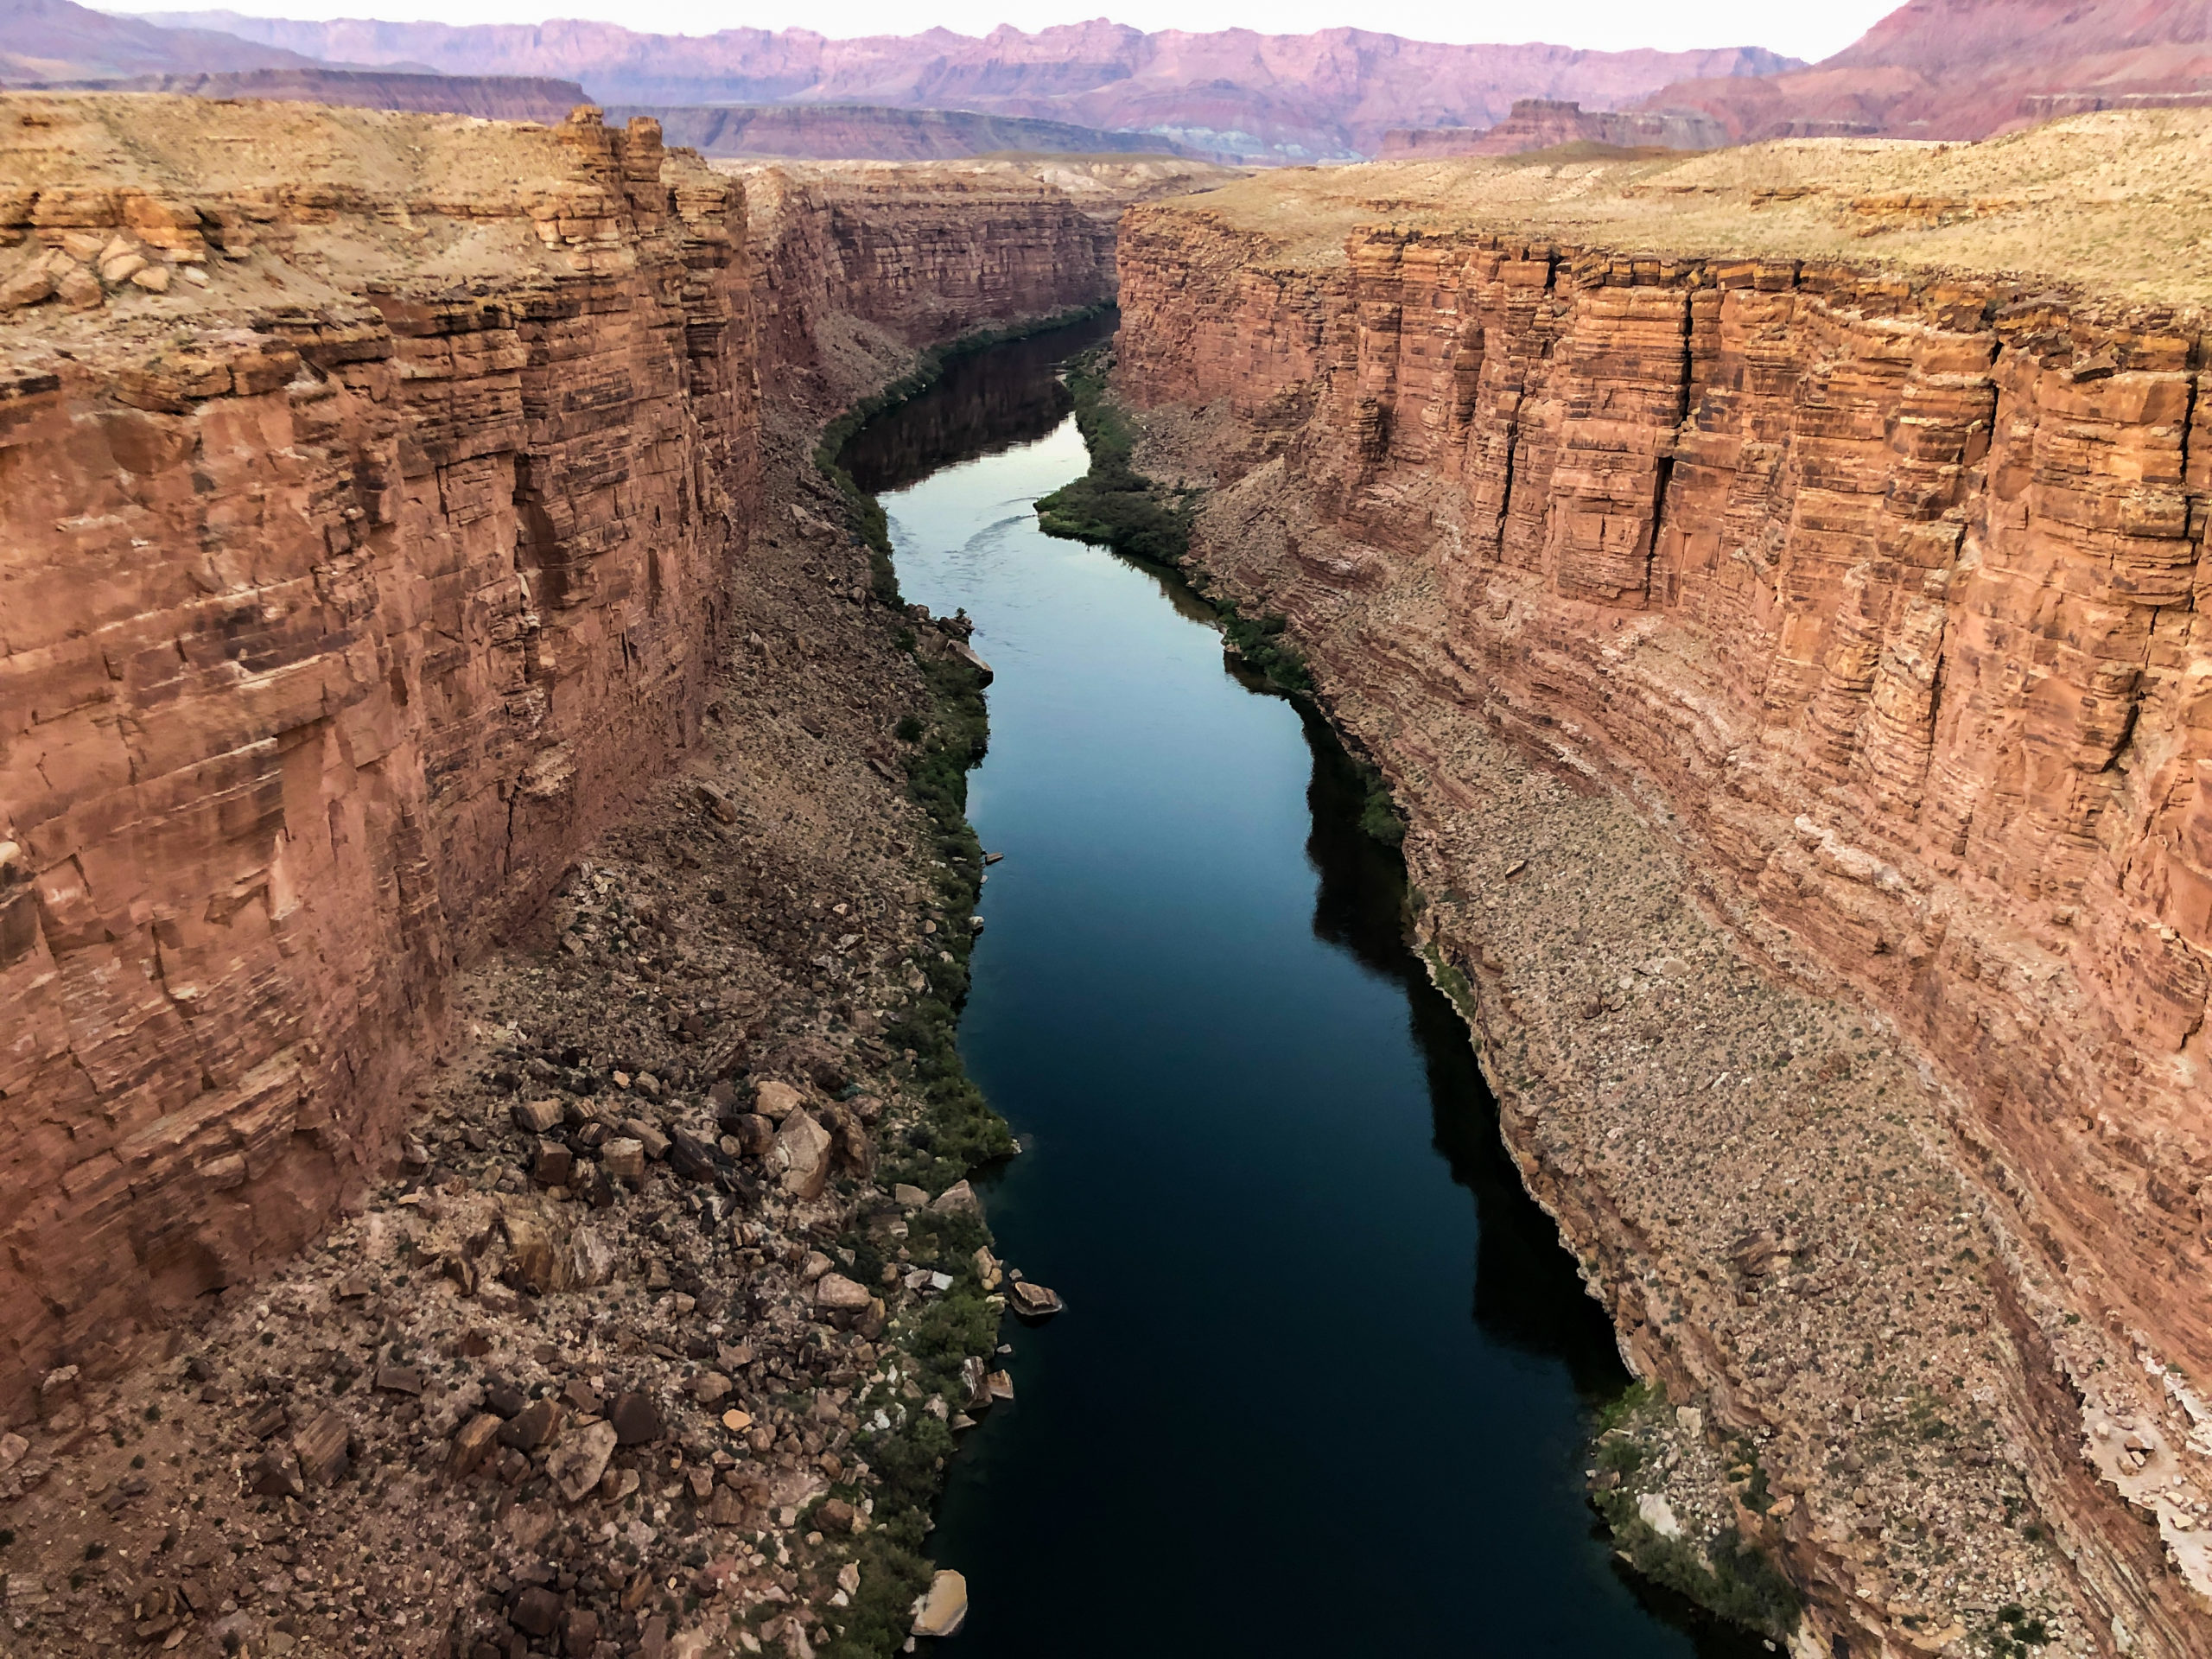 A tranquil stretch of the Colorado River near the Navajo Bridge in Marble Canyon, Arizona. The river supplies water to 40 million people across seven western states and is used to irrigate 5.5 million acres of land for agricultural uses. Photo credit: Denver Water.